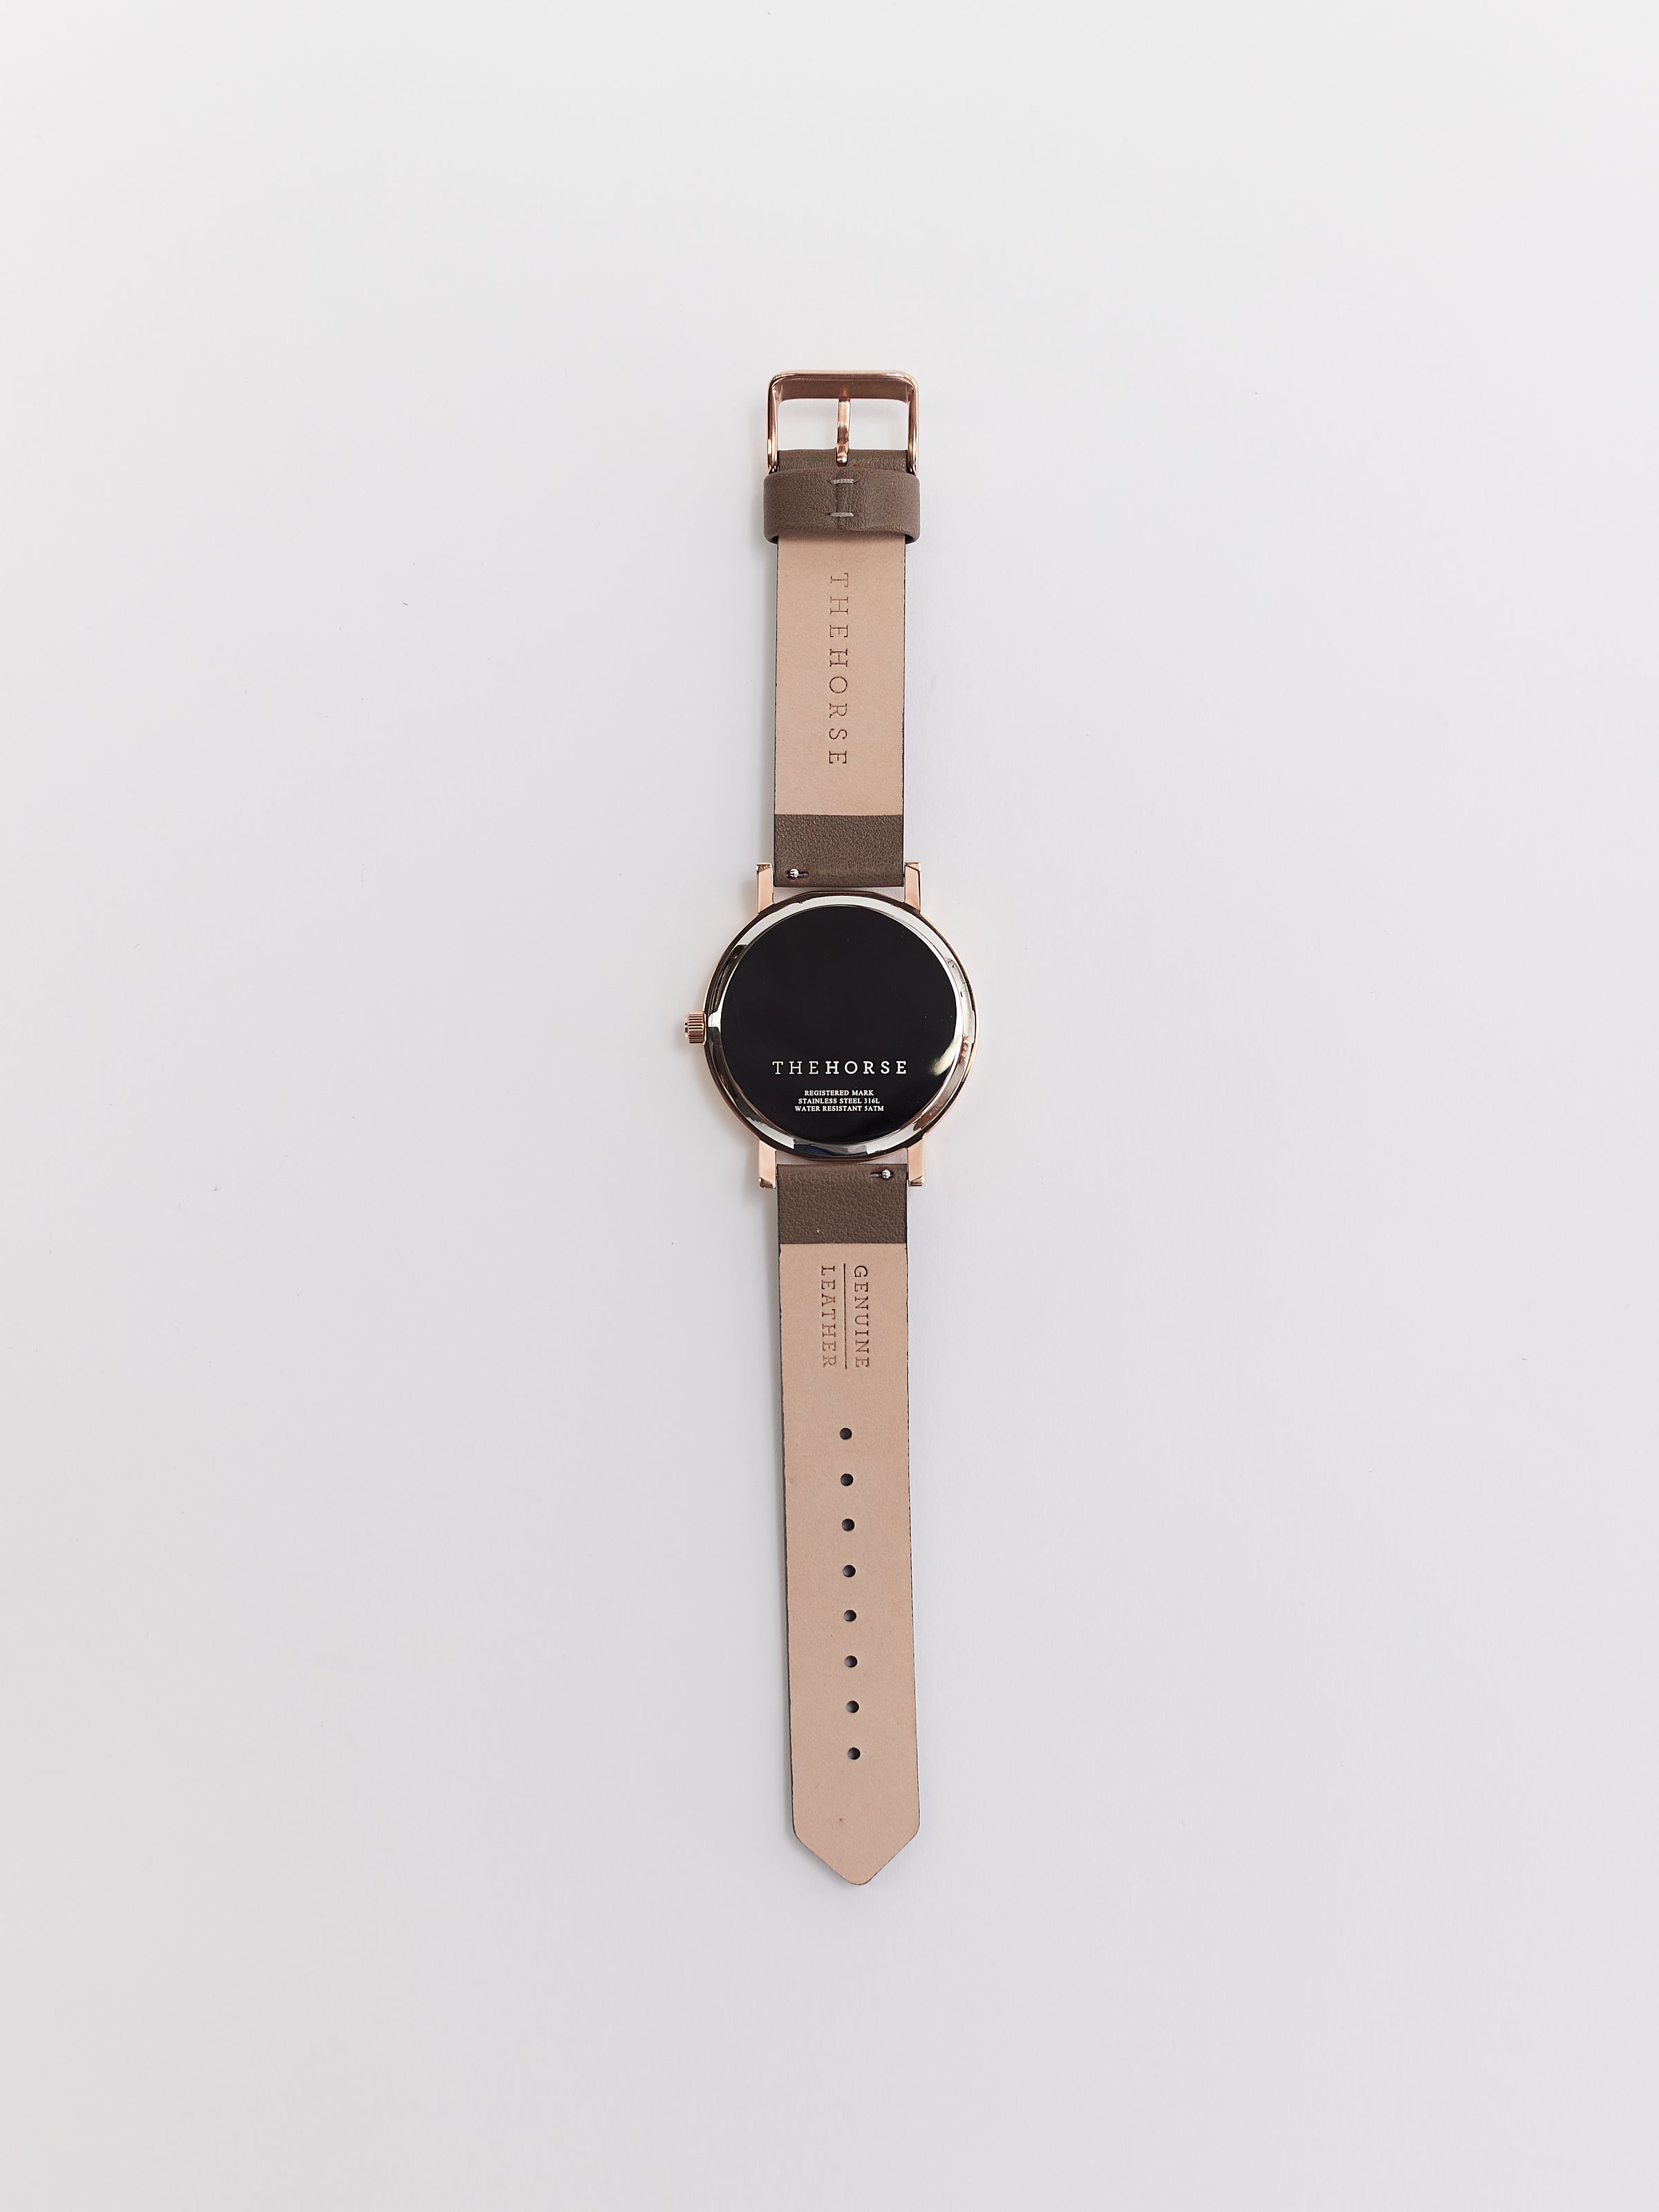 The Original: Polished Rose Gold / White Face / Taupe Leather